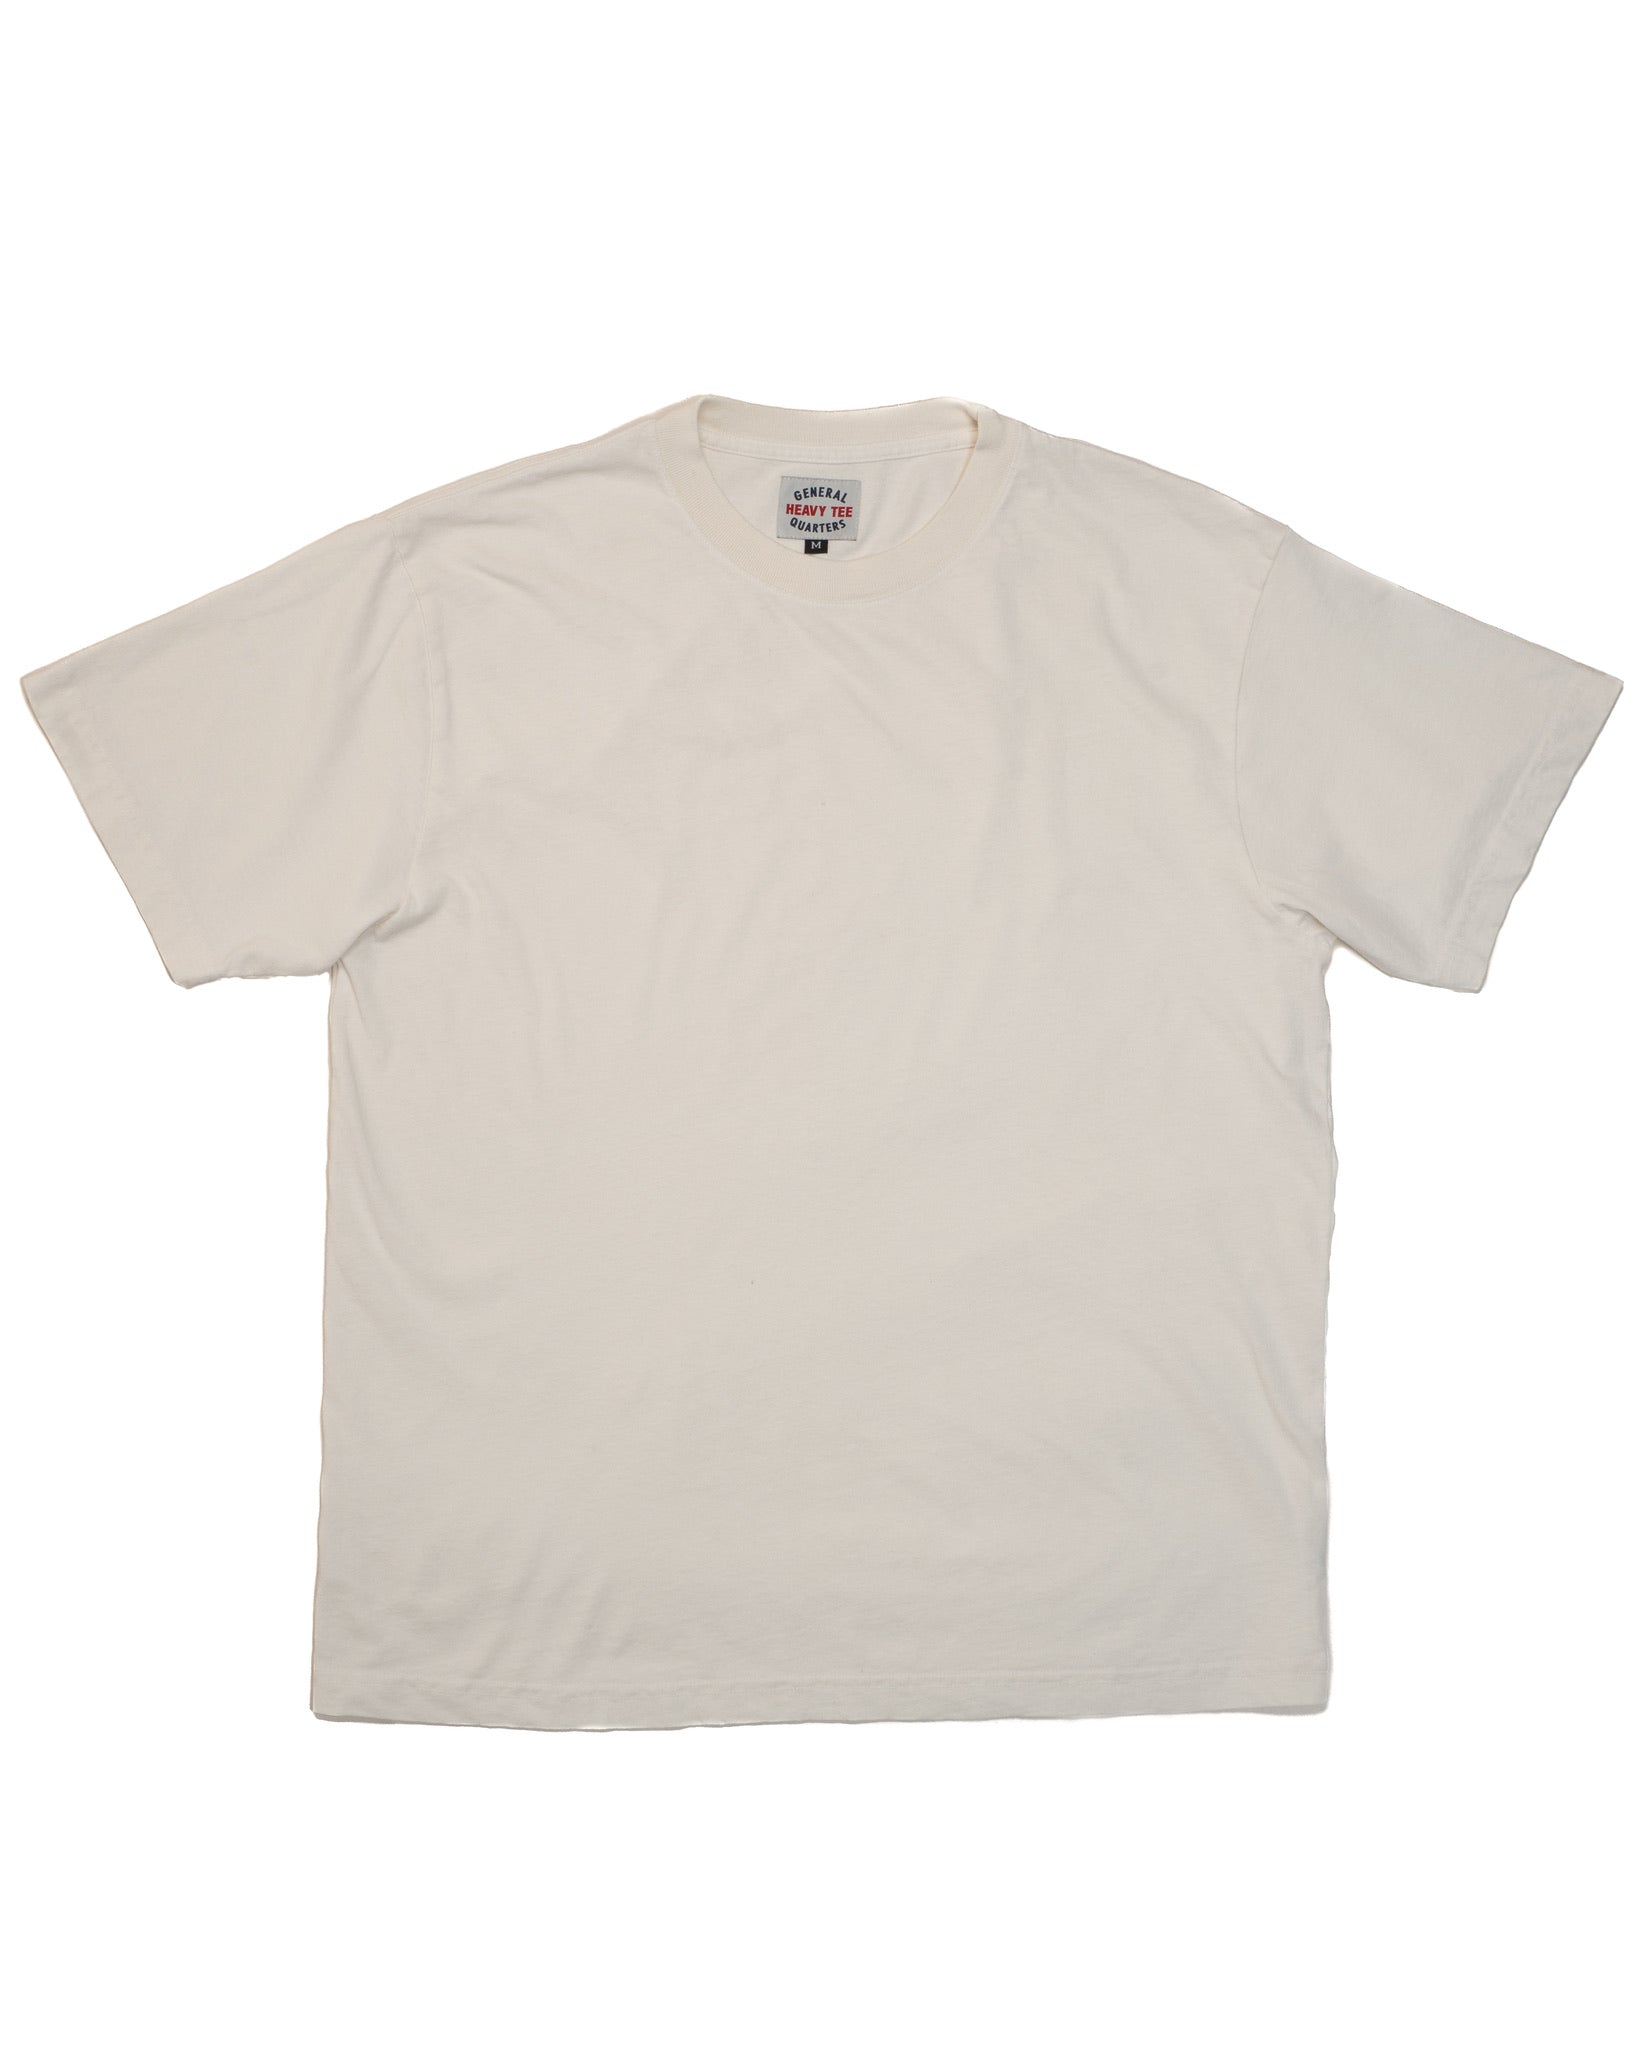 Heavy Weight T-Shirt in Vintage White